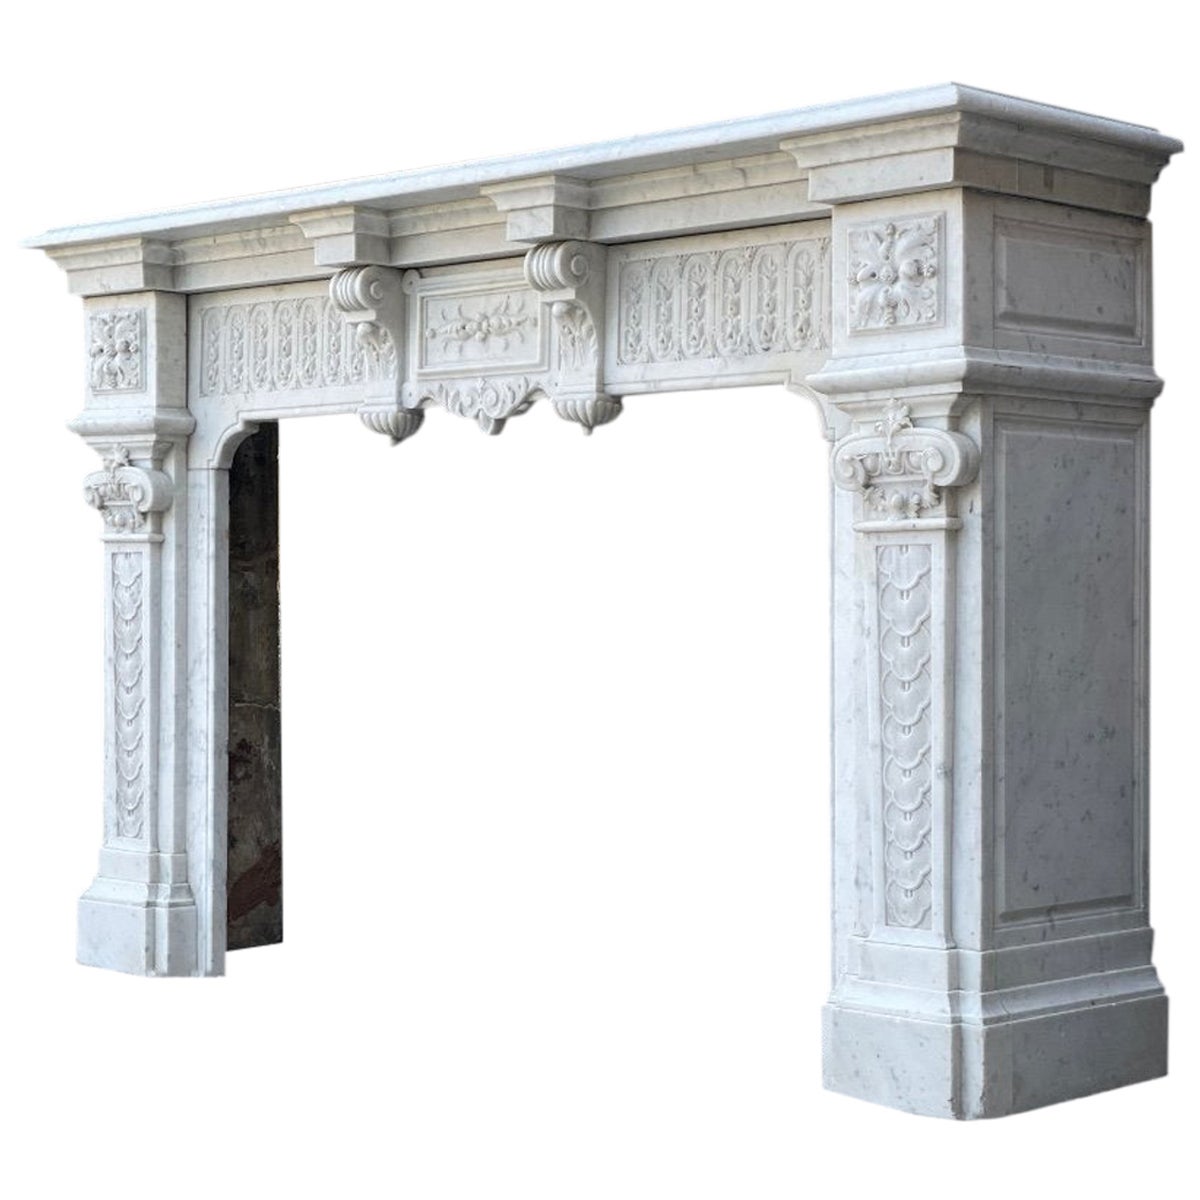 Napoleon III Fireplace In Carrara Marble For Sale